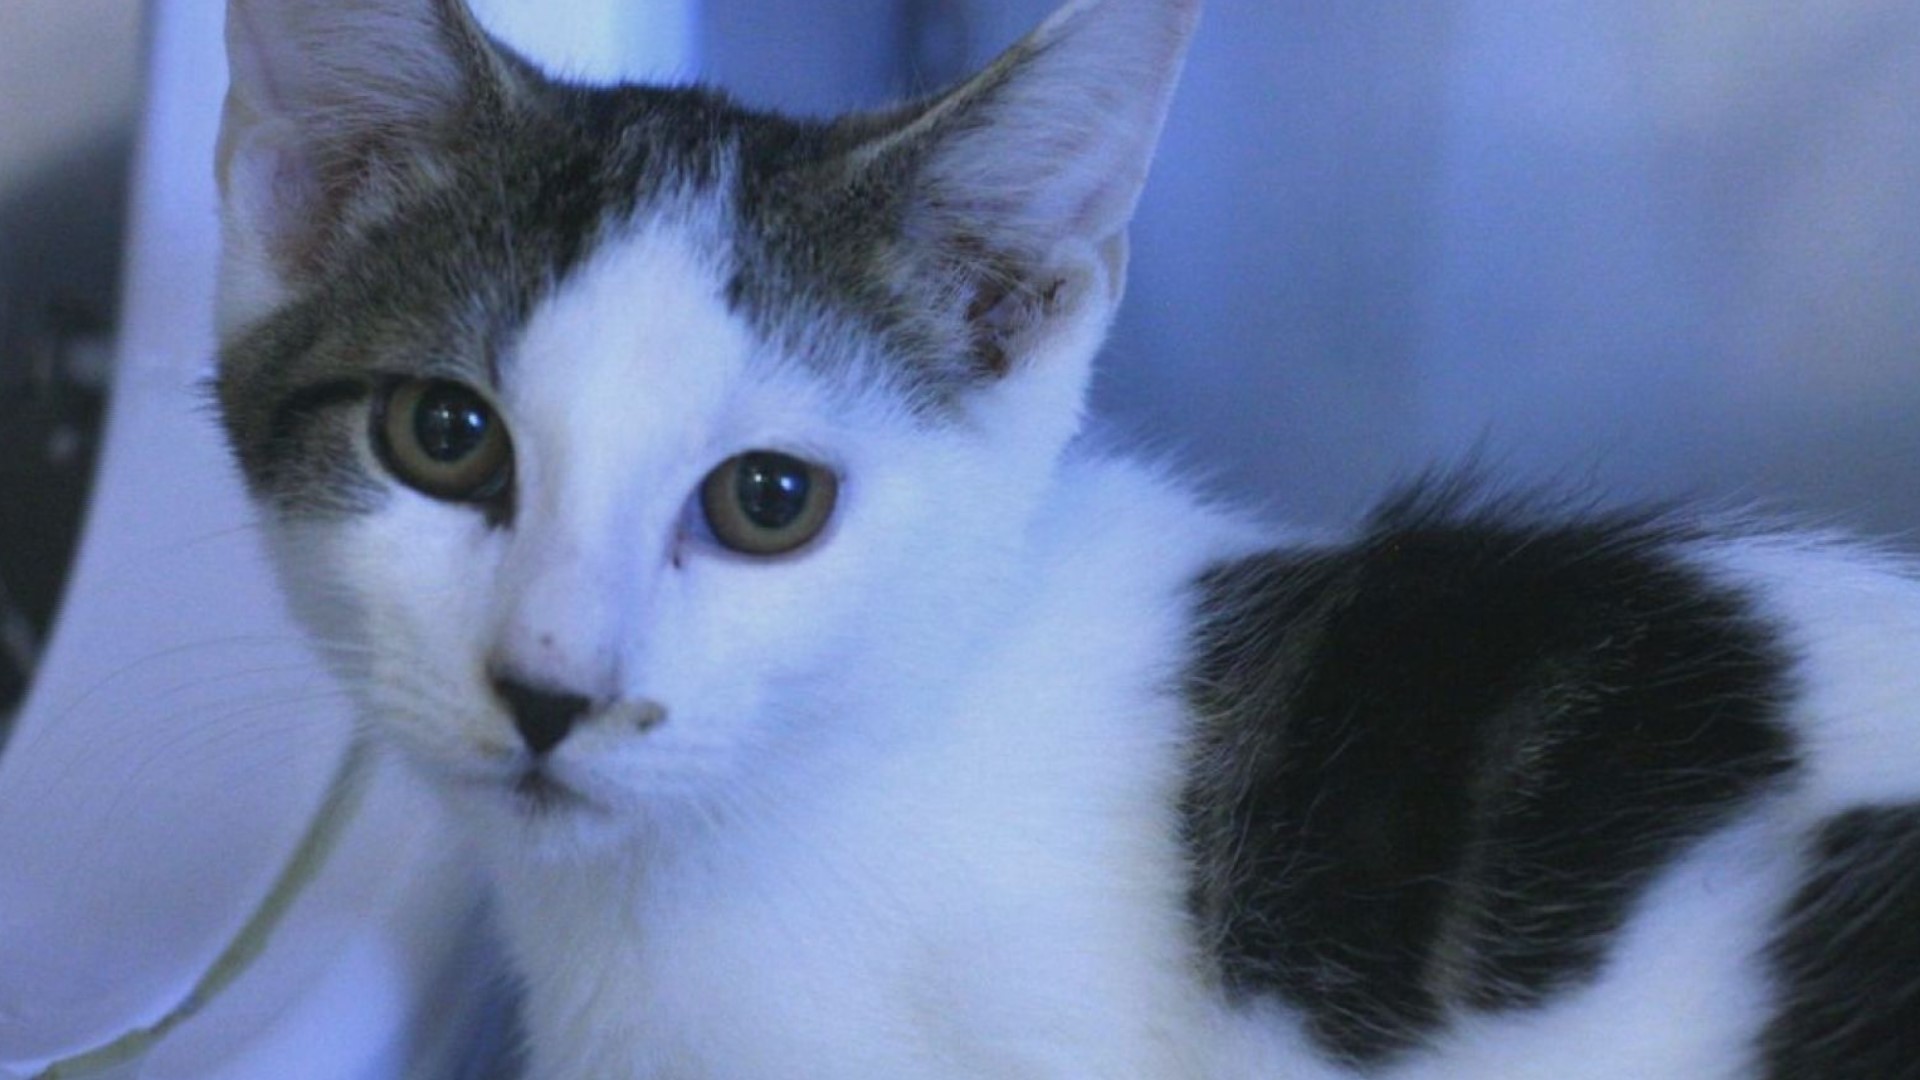 Chandler is a 4-month-old kitten who is looking for his forever family at the Pet Pantry of Lancaster County.